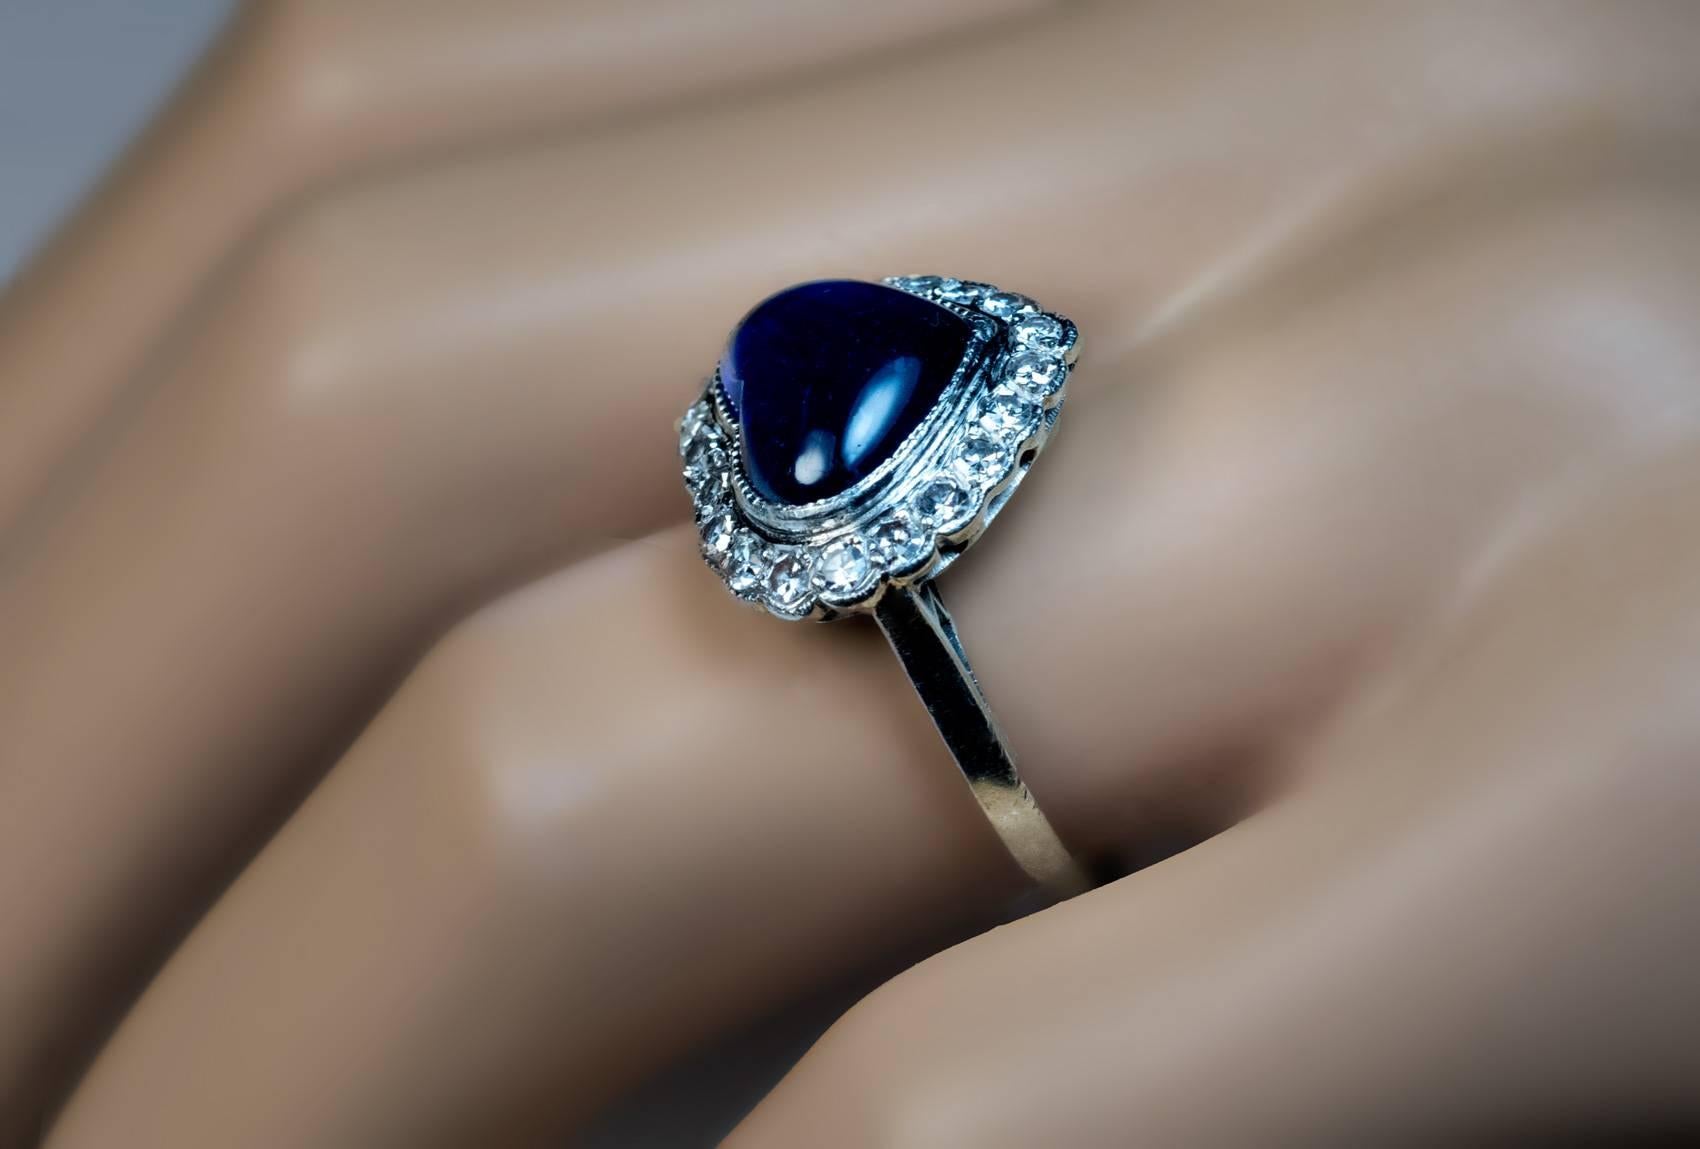 Circa 1930

A platinum ring from Art Deco era features a heart-shaped cabochon cut natural unheated blue sapphire framed by 21 single cut diamonds.

The sapphire is approximately 5 carats.

Estimated total diamond weight 0.63 ct.

Ring size 7.75 (18